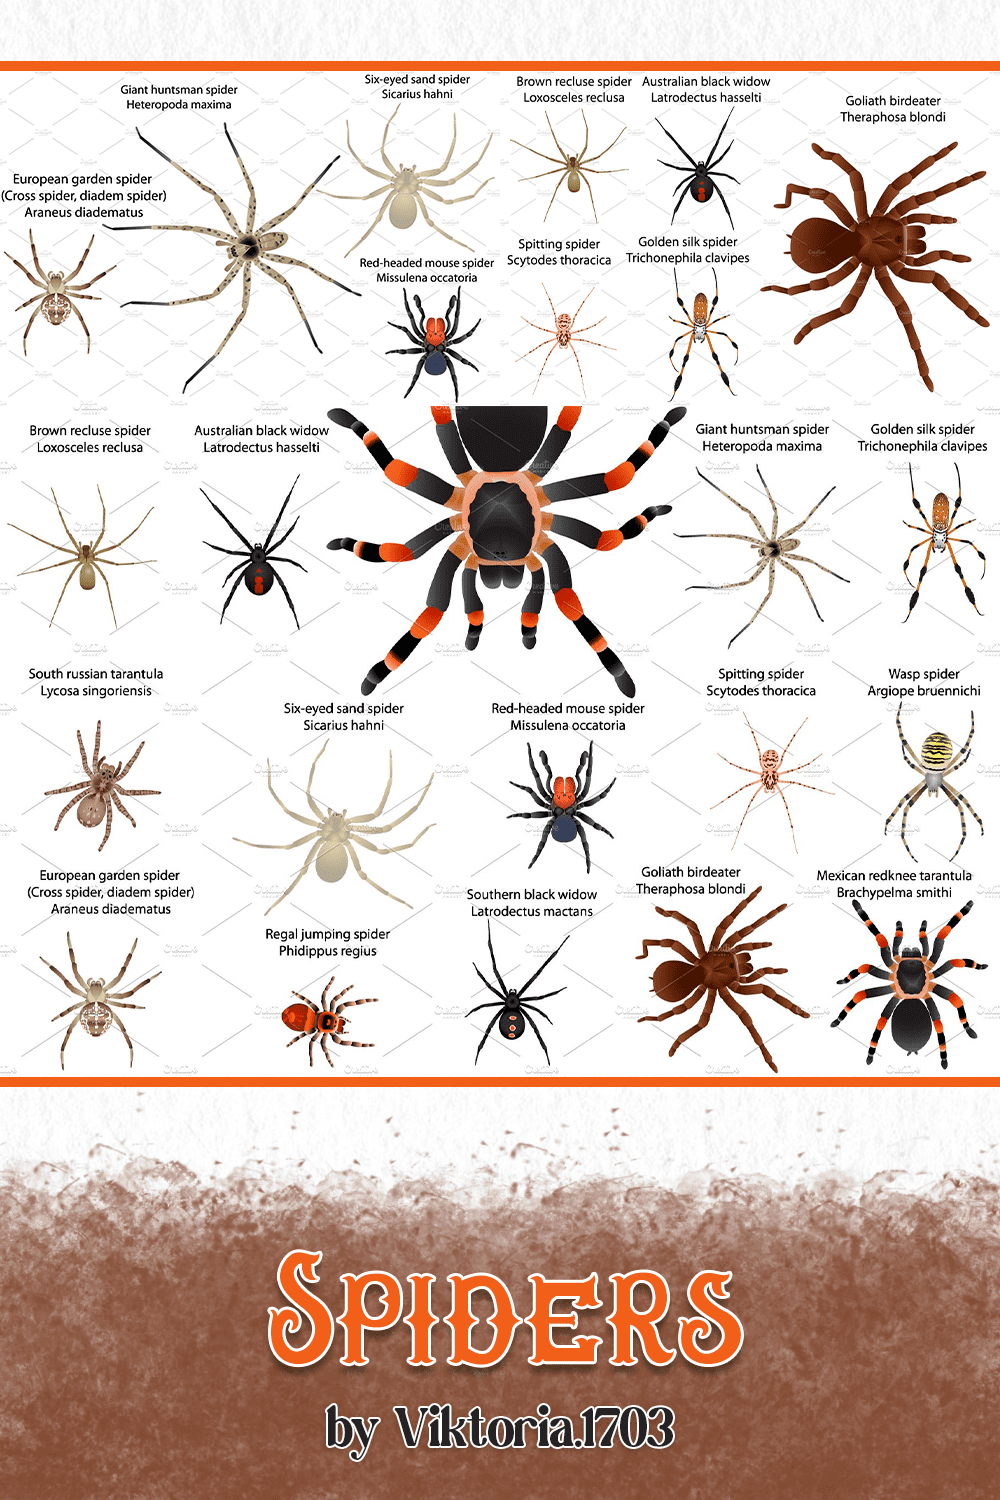 Diverse of multicolors spiders.